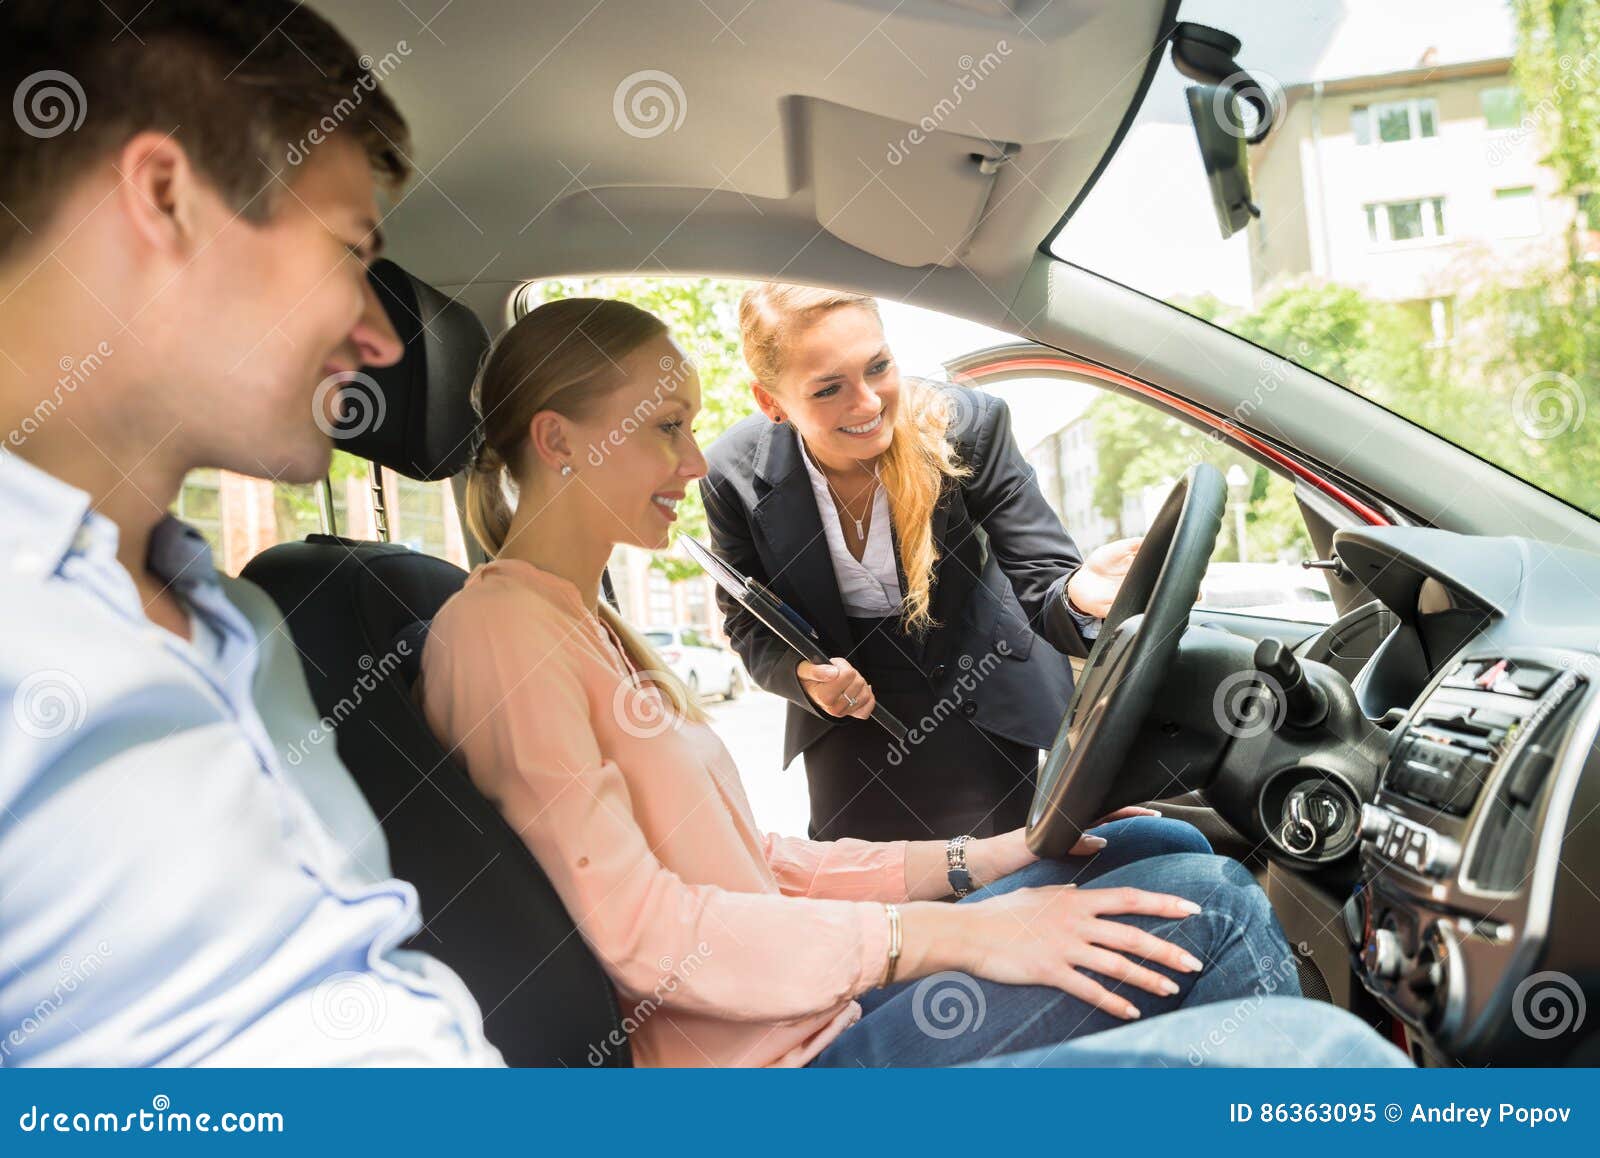 saleswoman showing car to couple